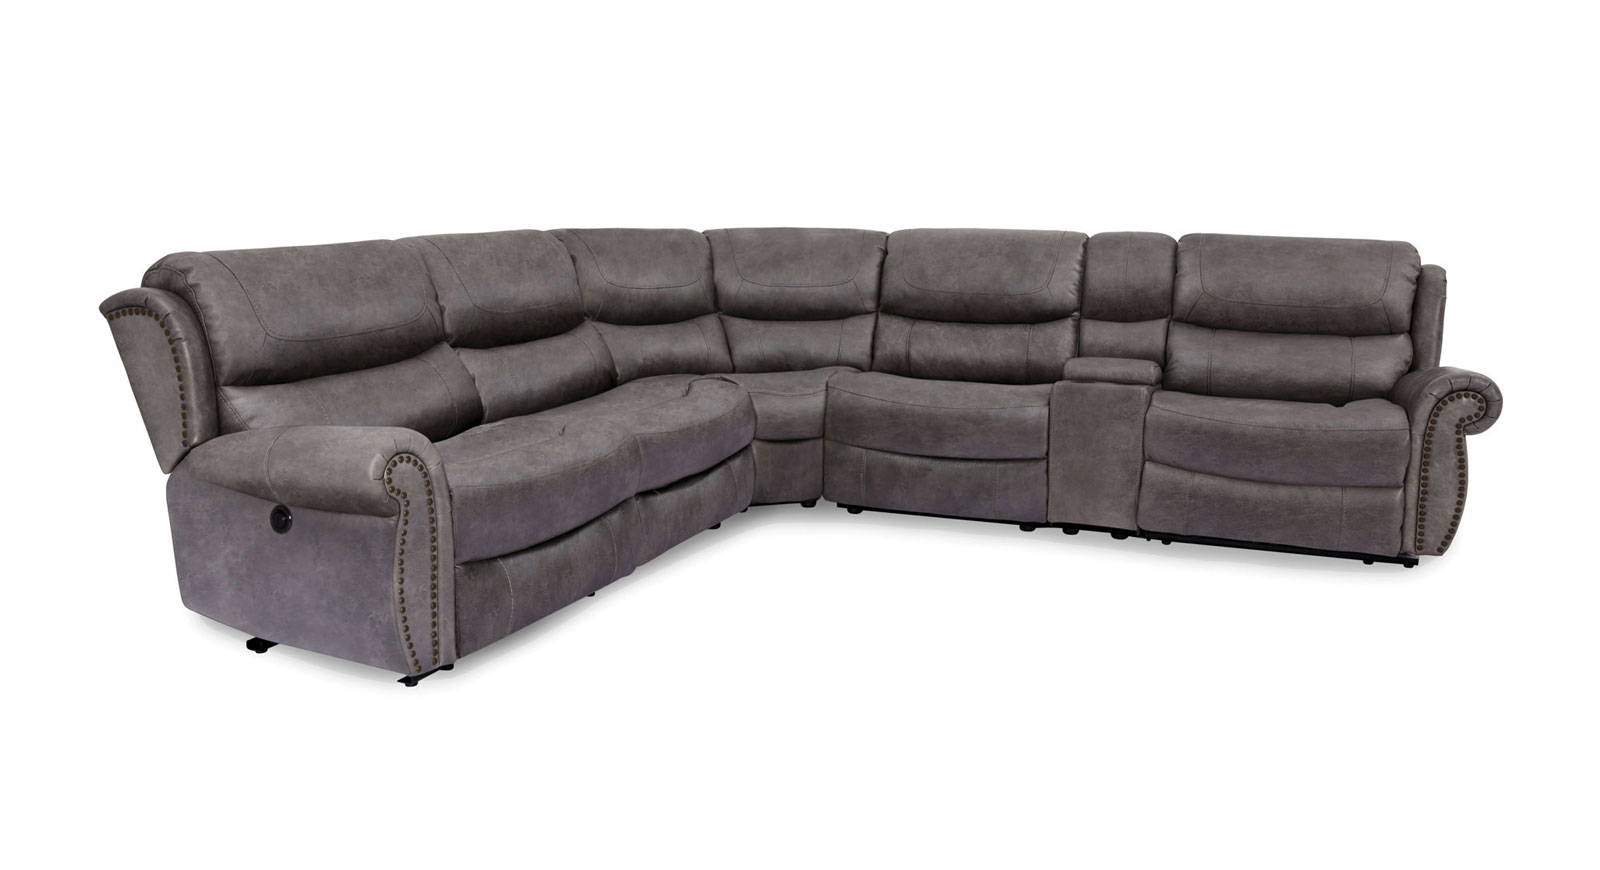 Features & Benefits Of The Steely Dan Sectional Product Review